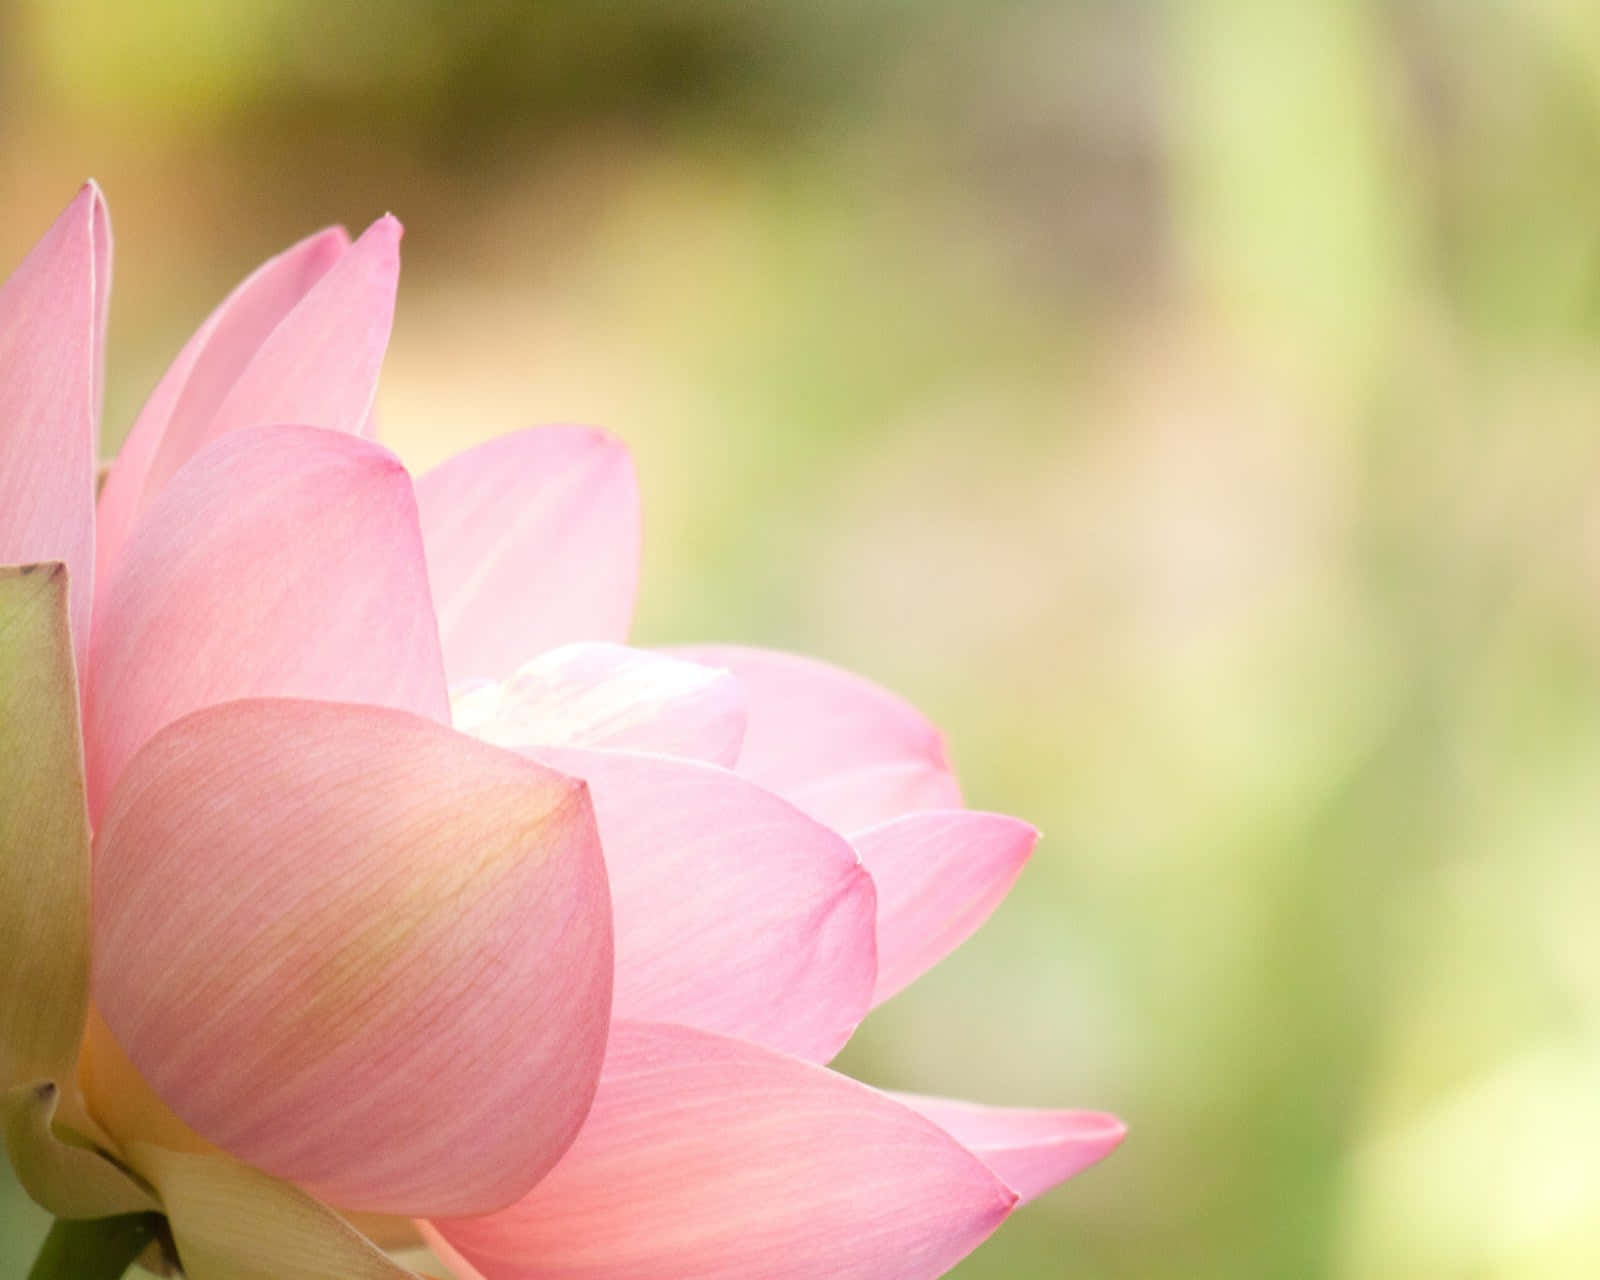 A Pink Lotus Flower Is In The Background